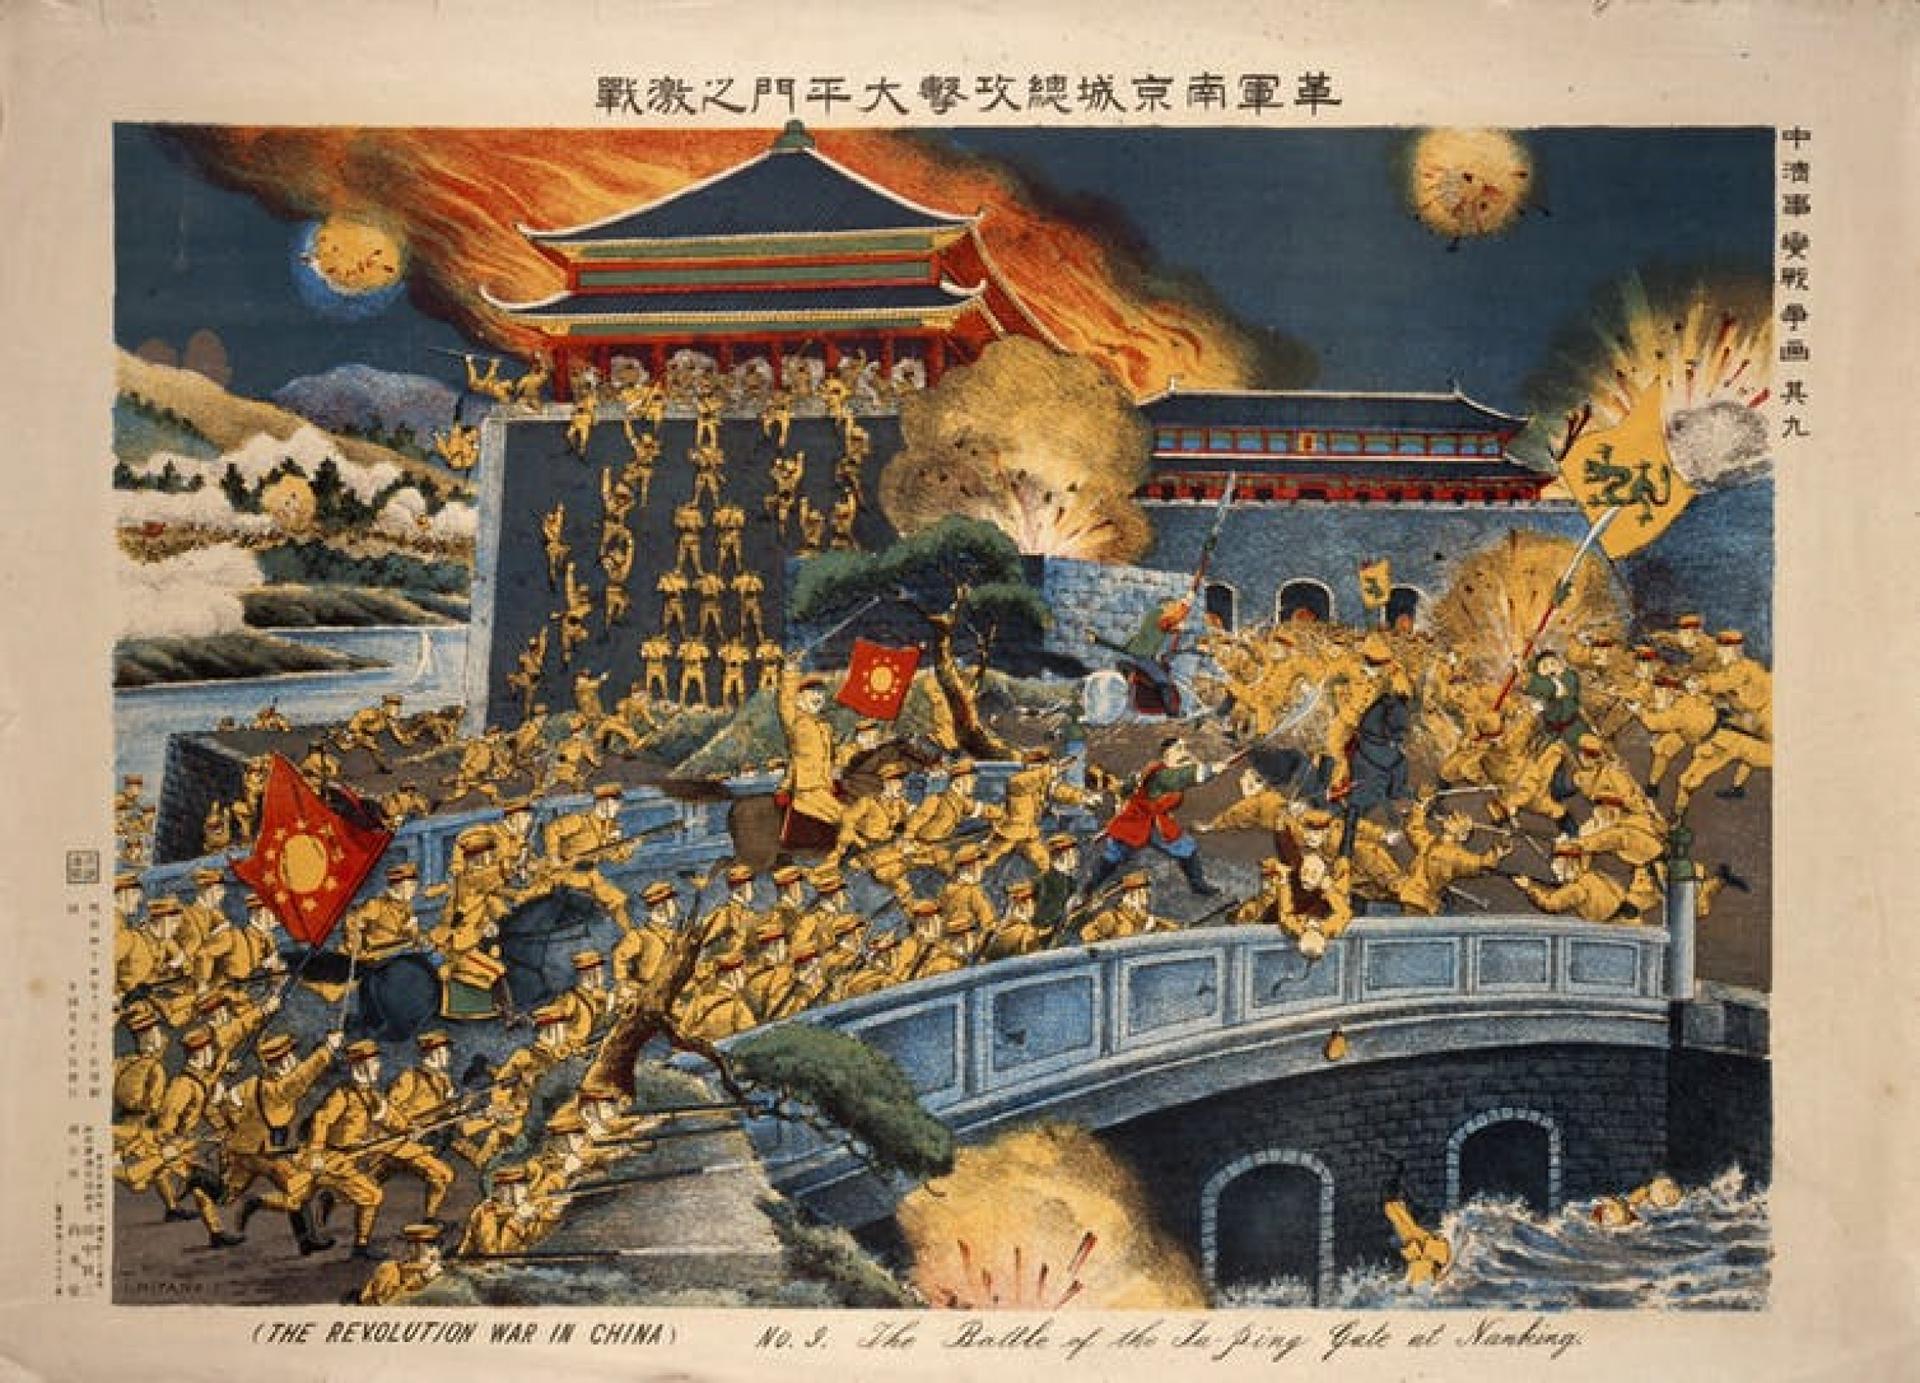 A painting of a revolution in China.